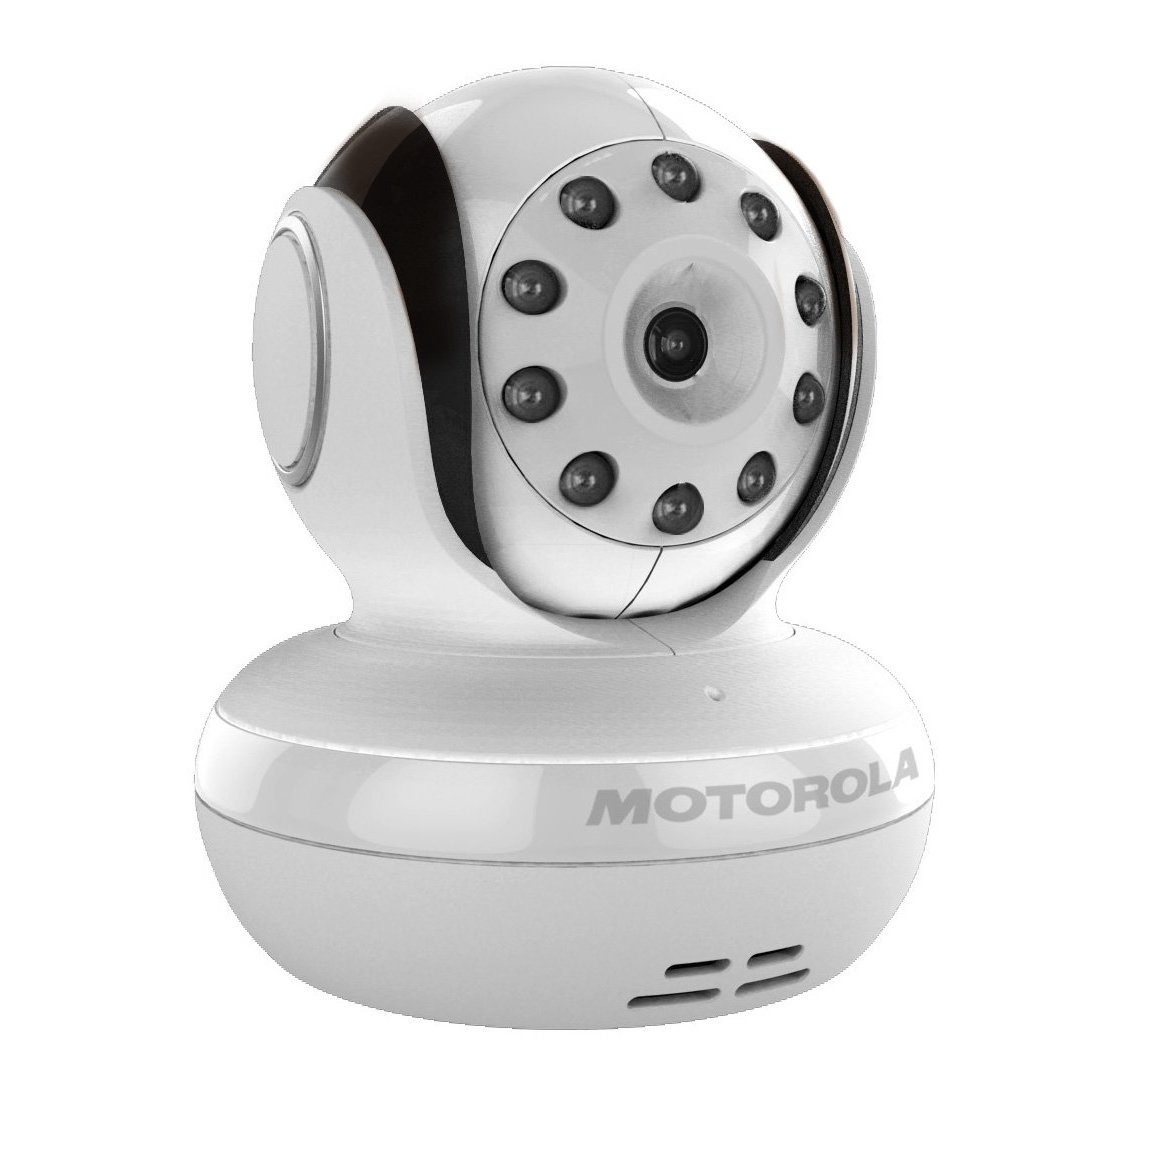 http://thetechjournal.com/wp-content/uploads/images/1110/1318126294-motorola-digital-video-baby-monitor-with-35-inch-color-lcd-screen-3.jpg